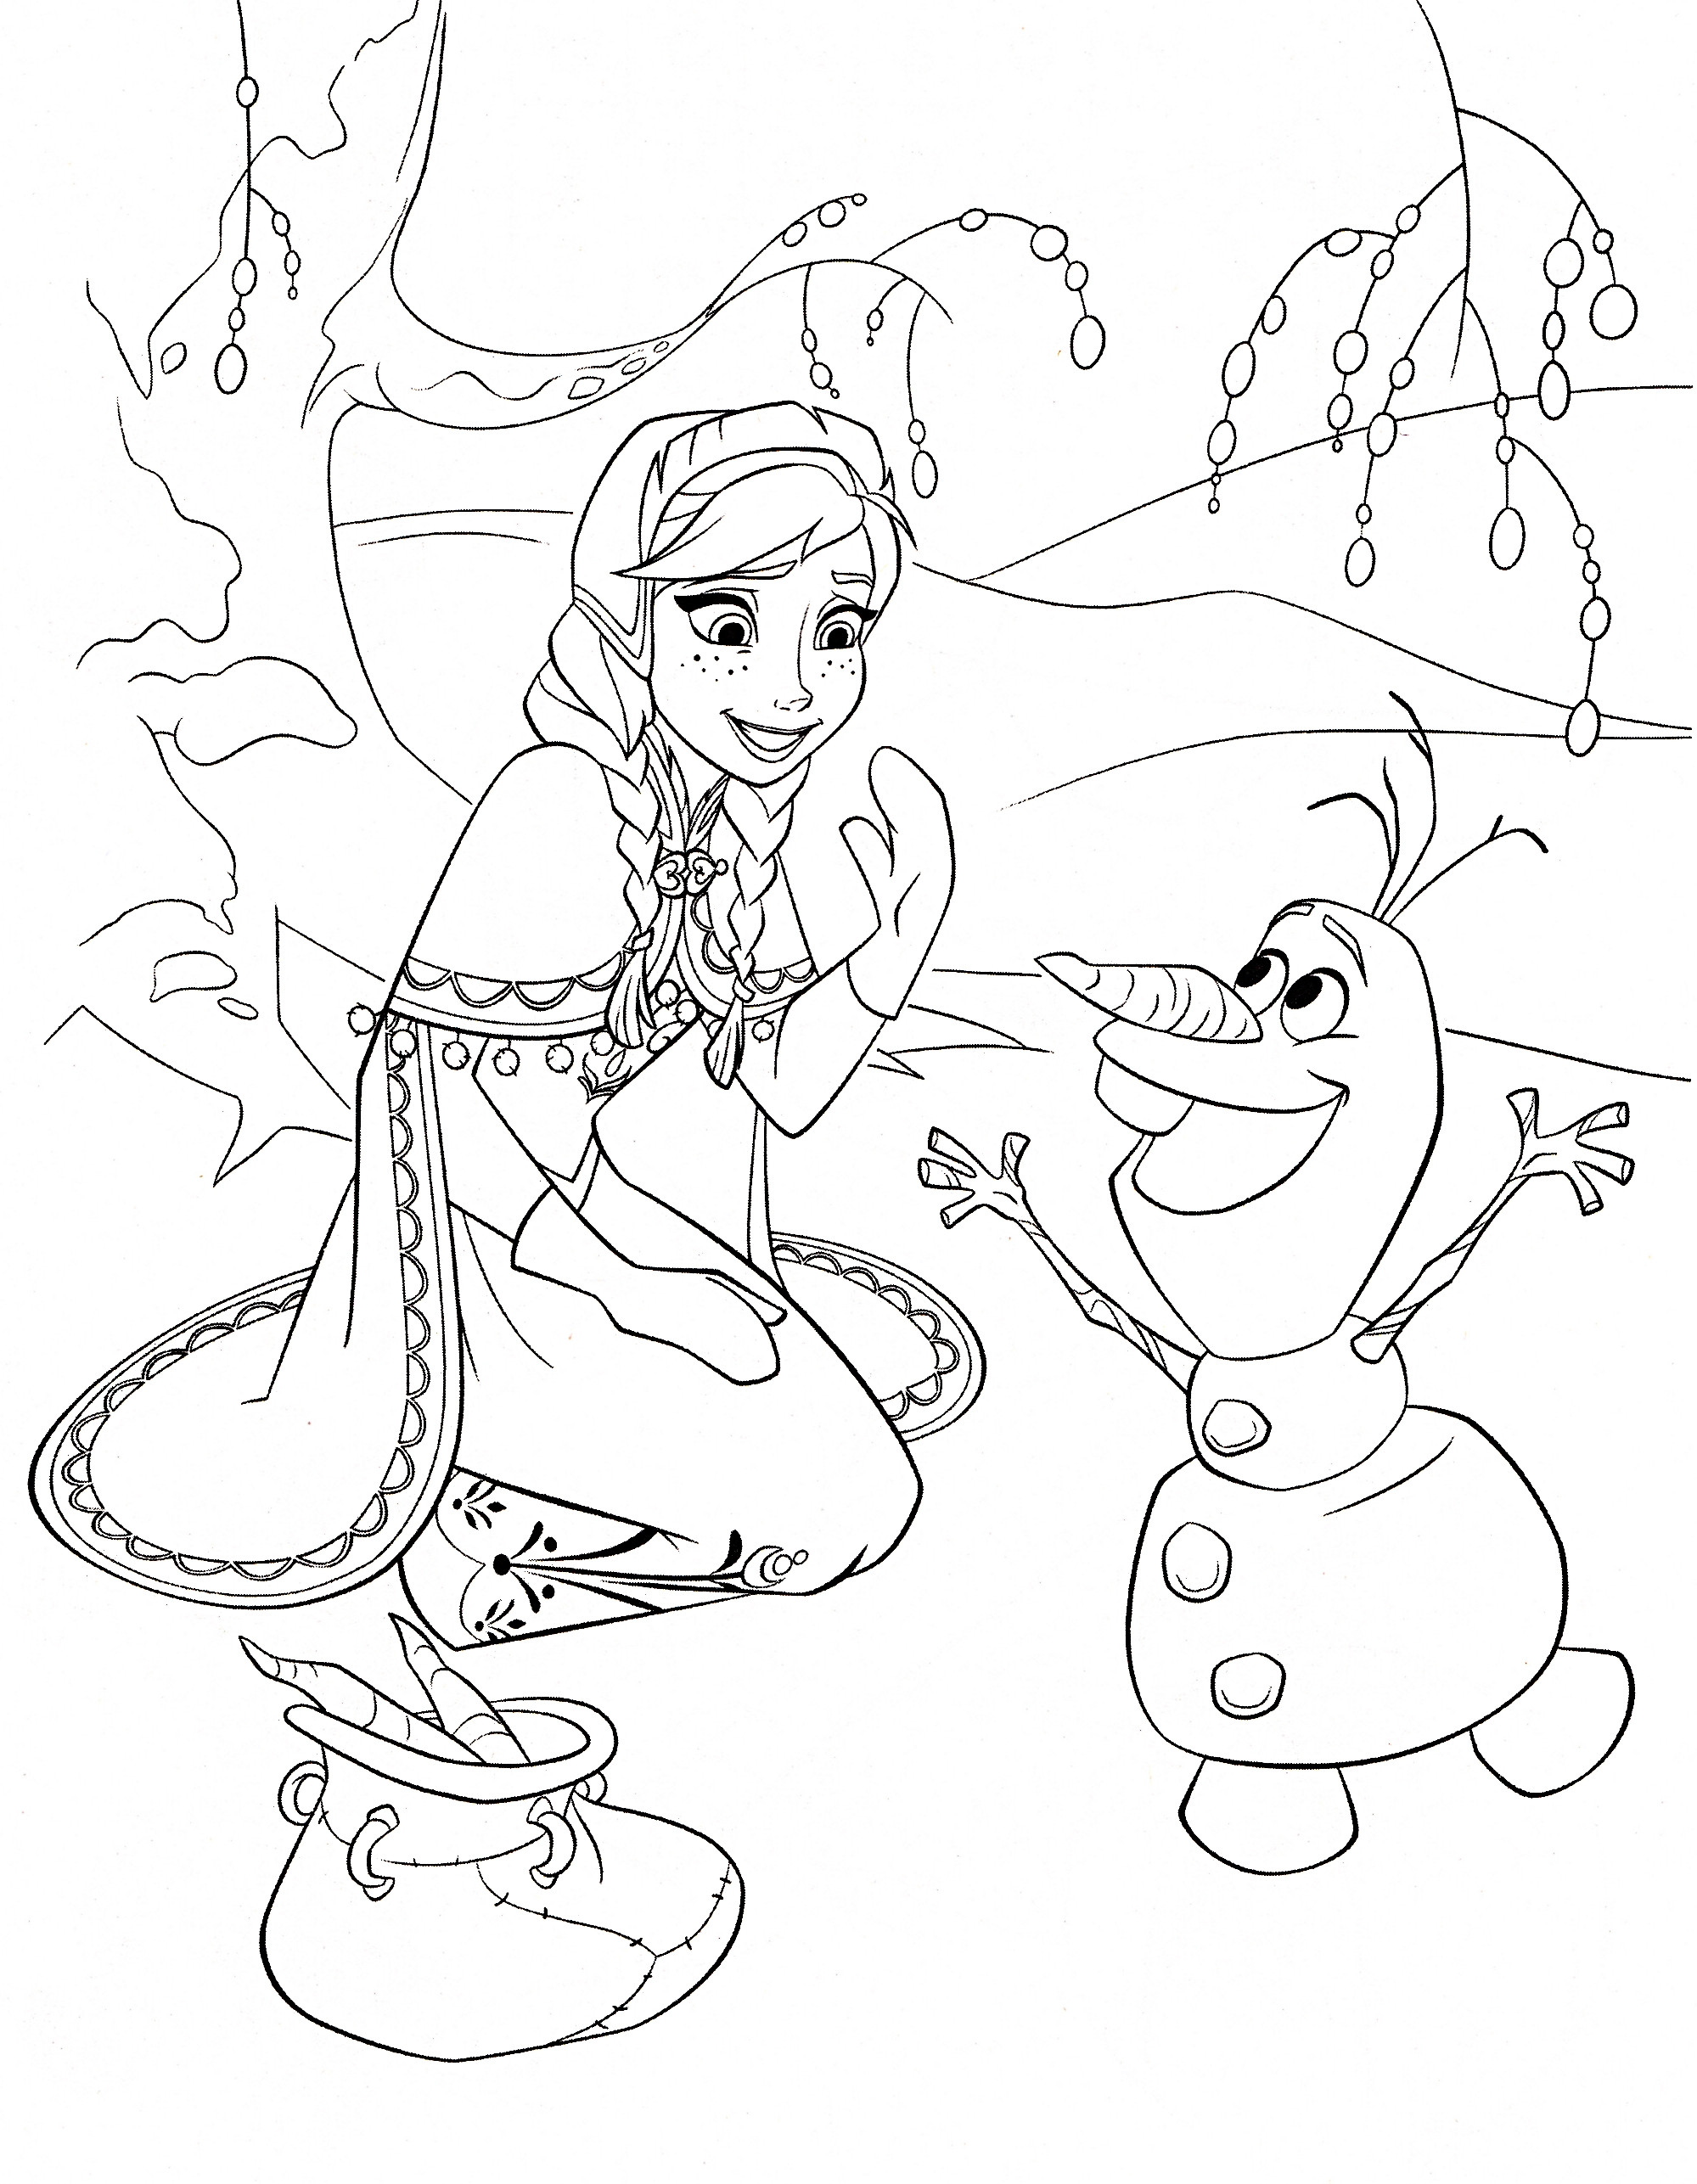 Printable Coloring Sheets Frozen
 FREE Frozen Printable Coloring & Activity Pages Plus FREE